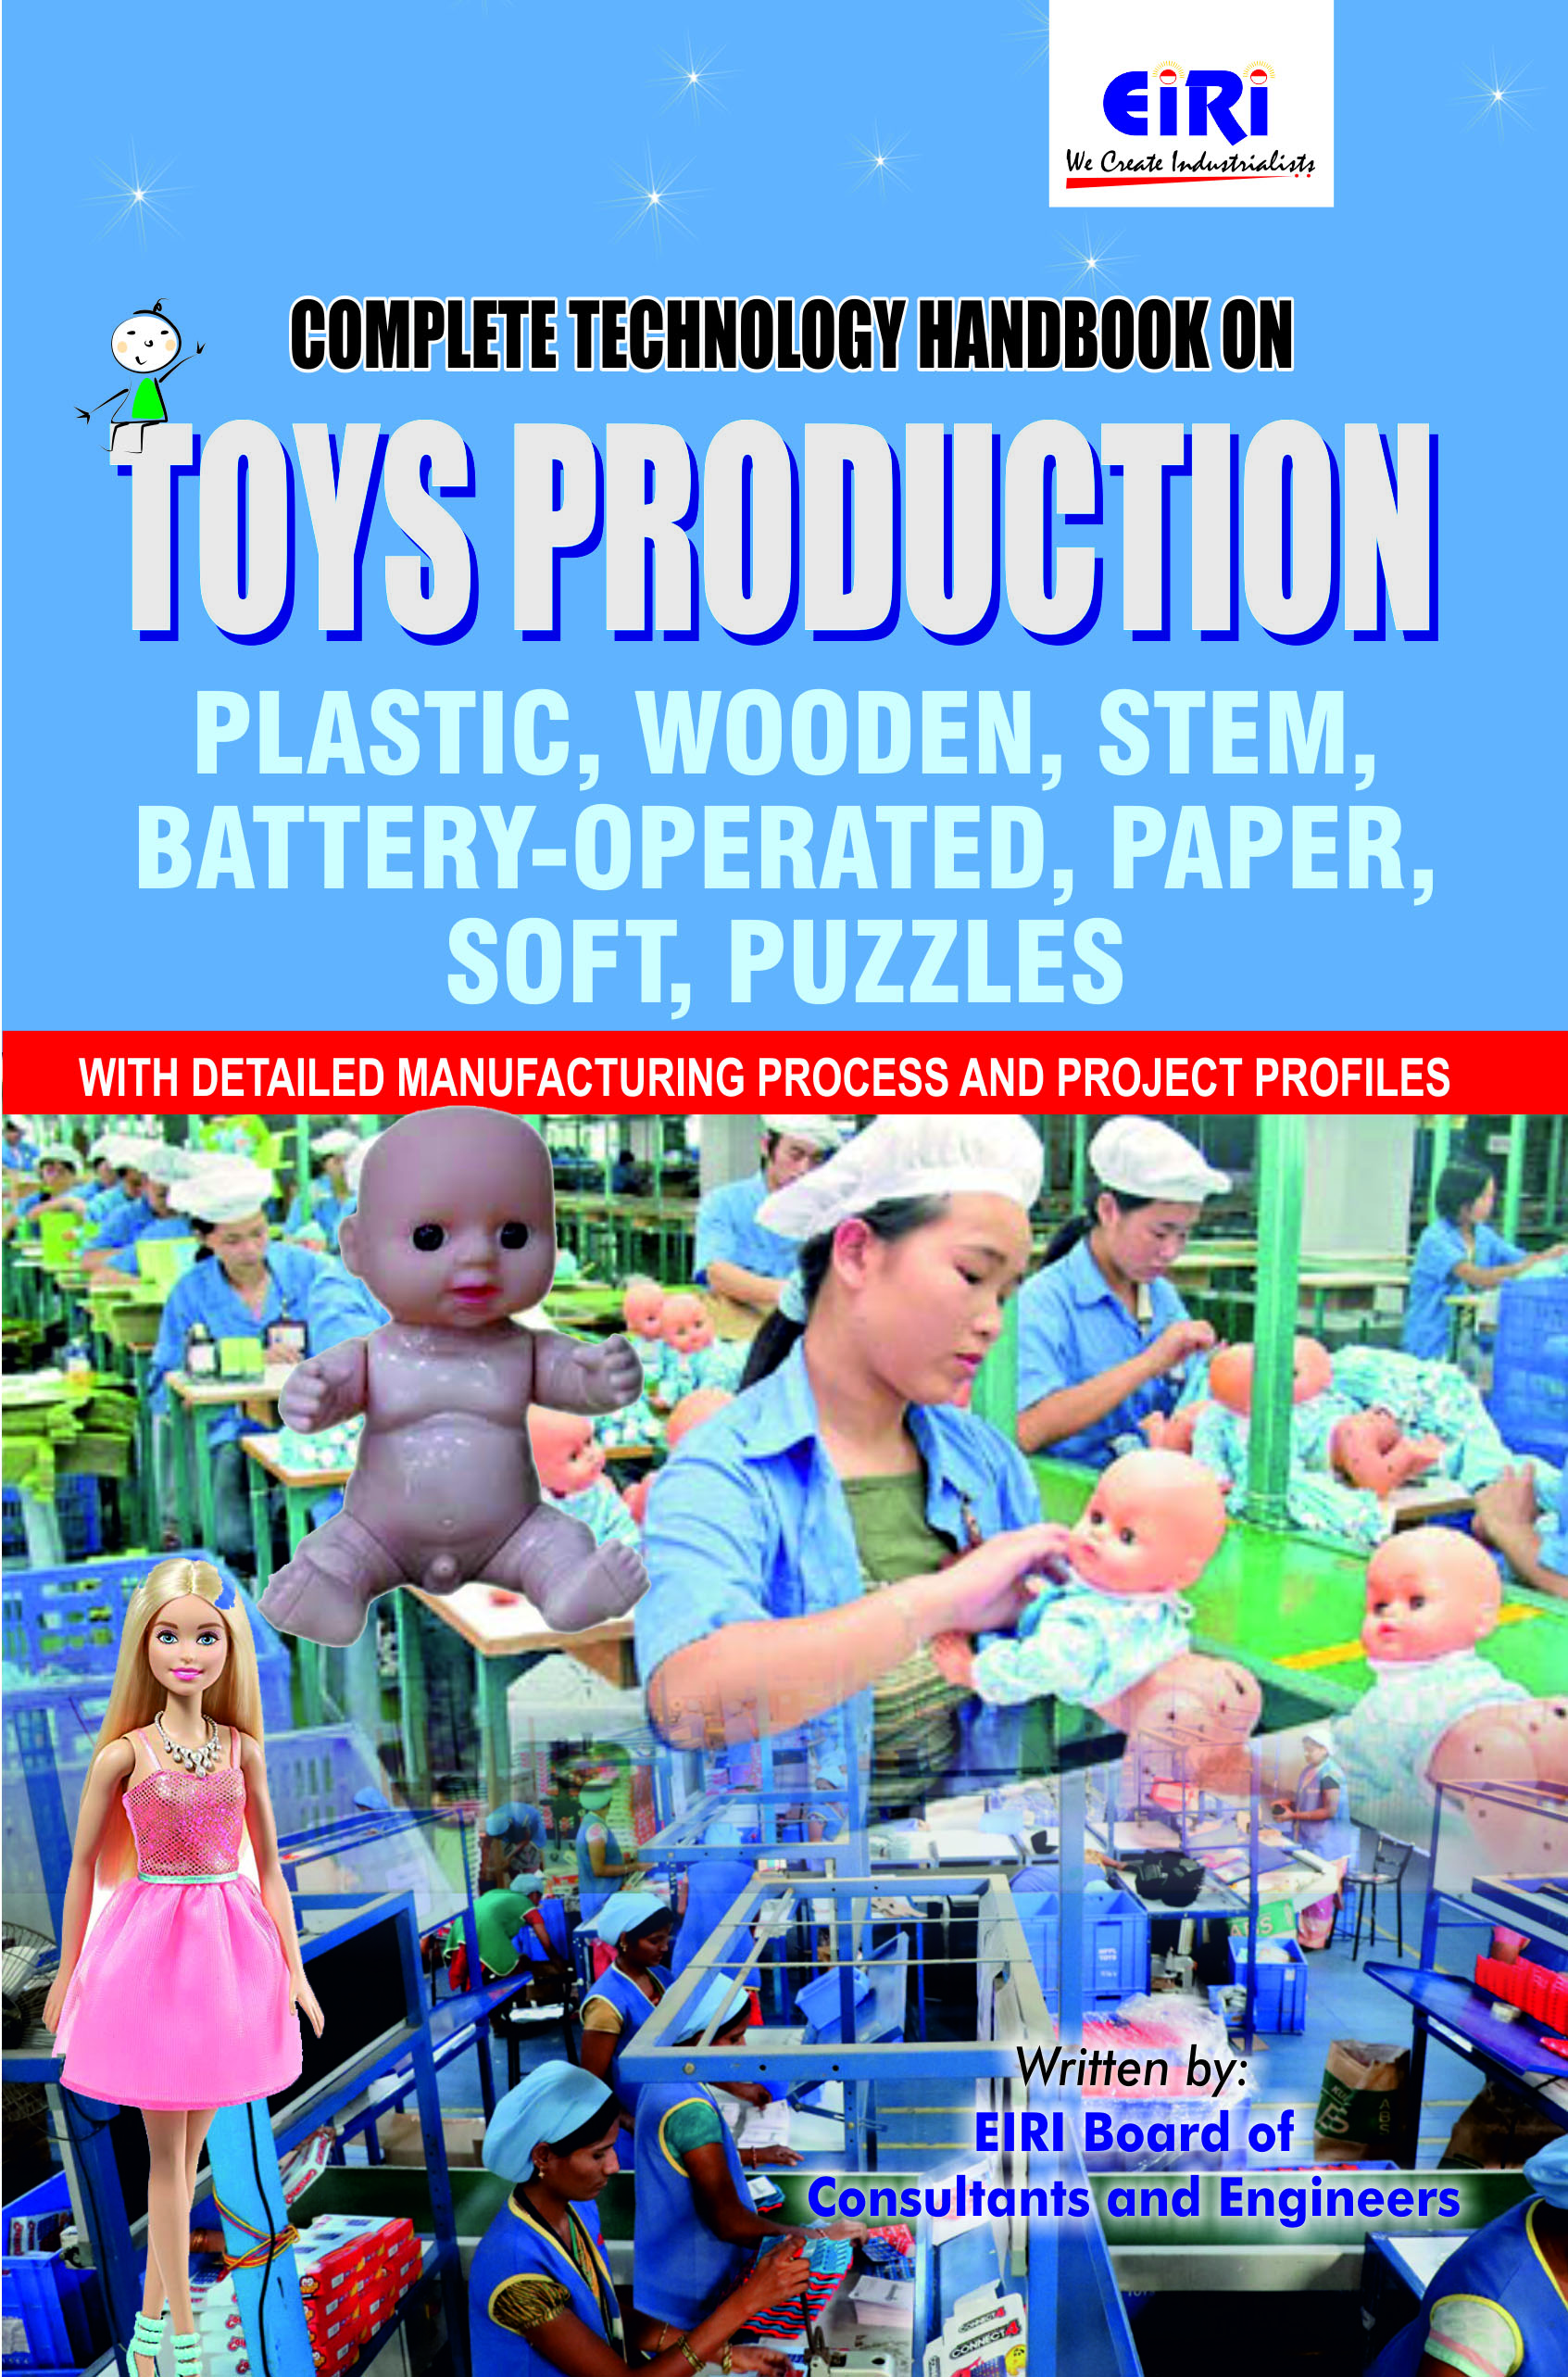 Complete Technology Handbook on Toys Production (Plastic, Wooden, STEM, Battery-operated, Paper, Soft, Puzzles) with Detailed Manufacturing Process and Project Profiles